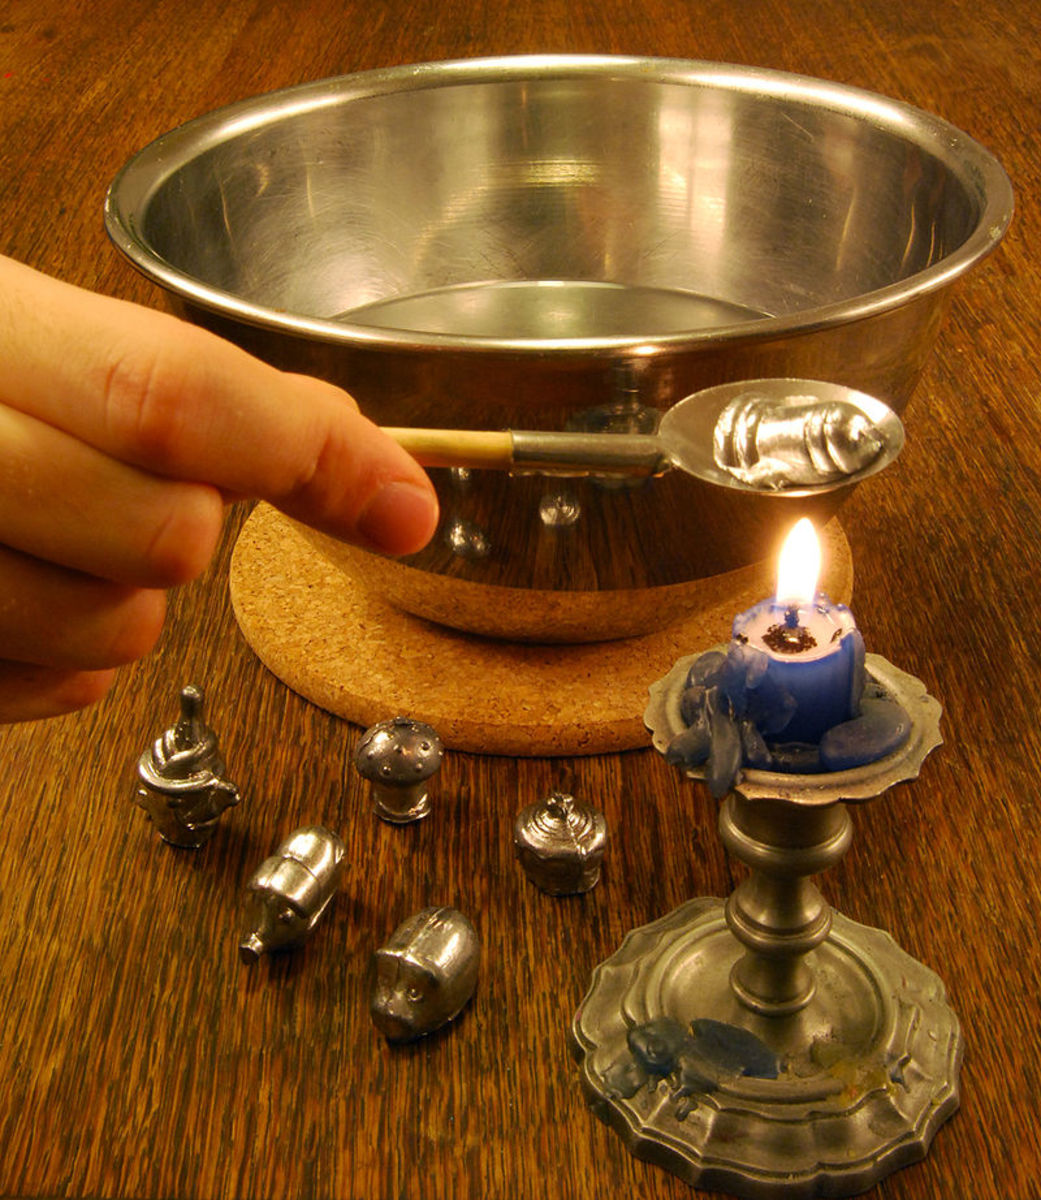 Divining with Lead - A German New Year's Custom